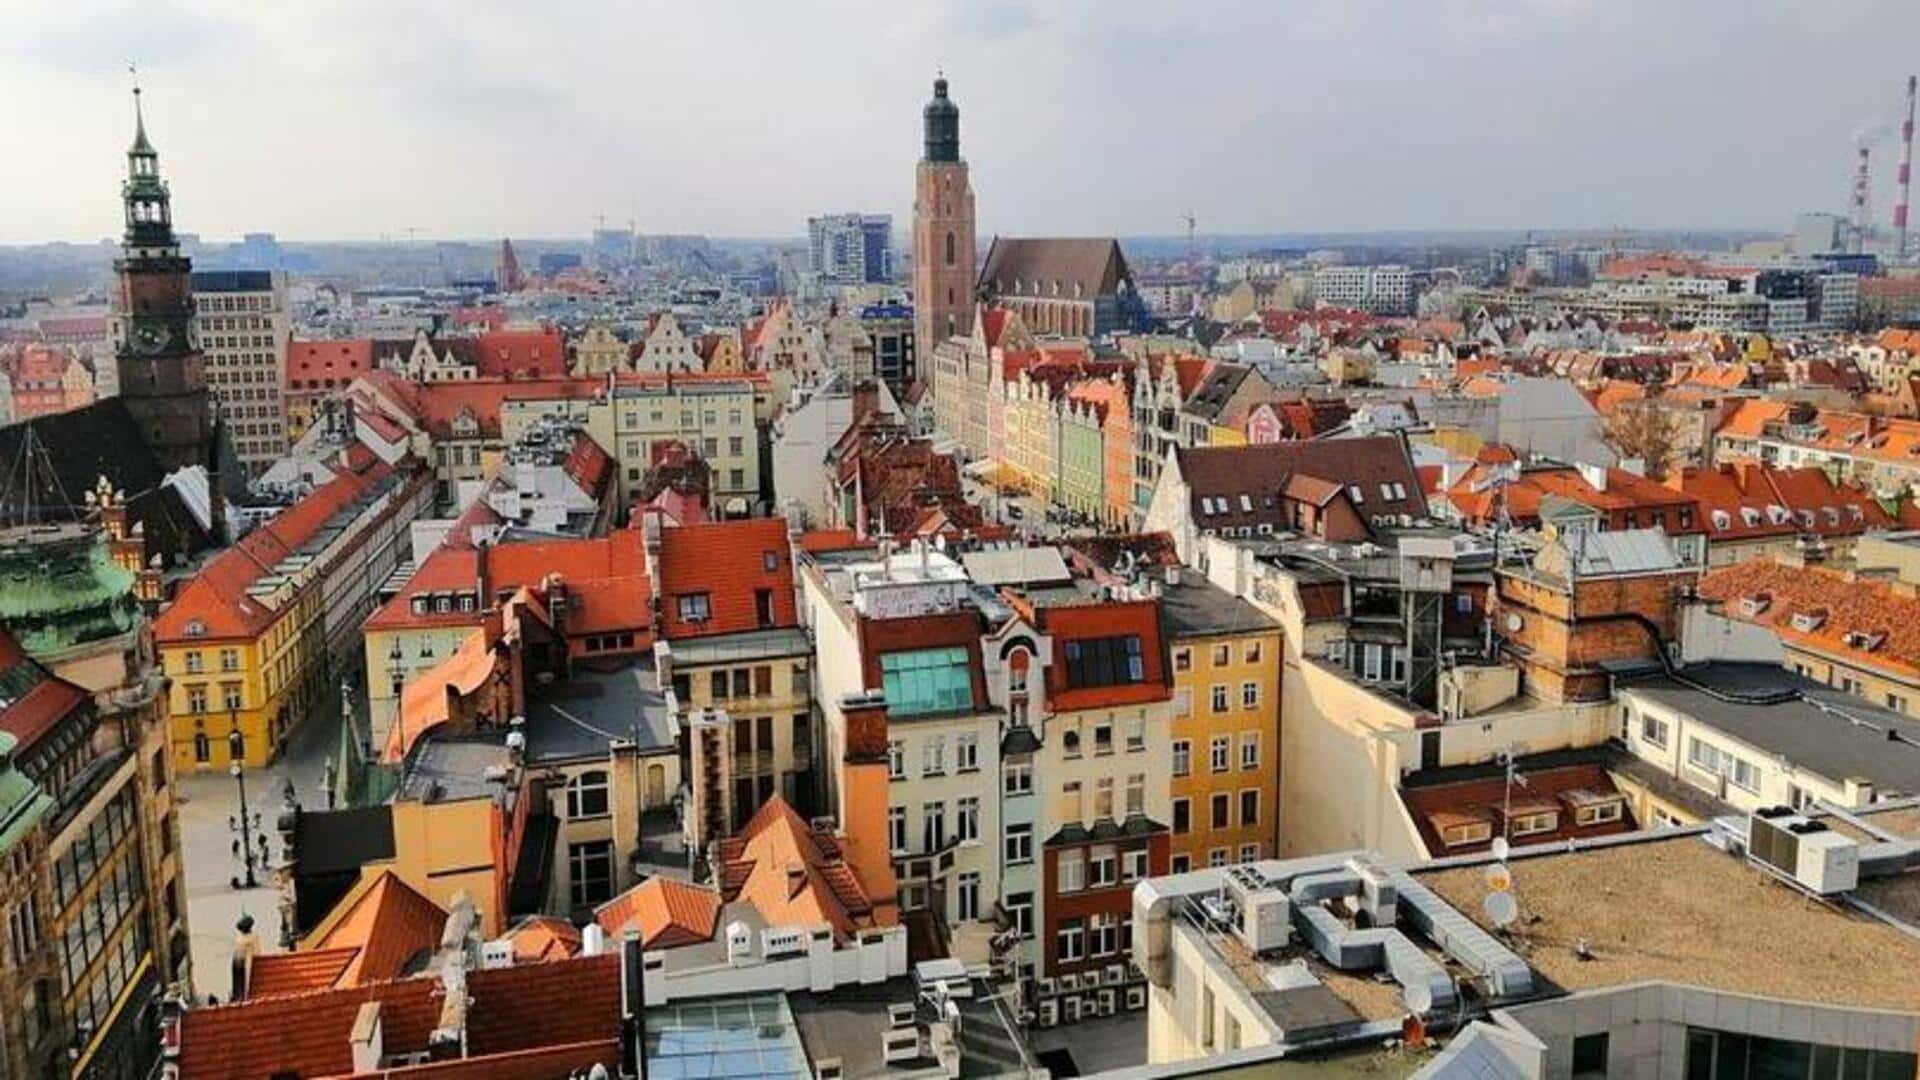 Traveling to Poland? Check out some offbeat attractions